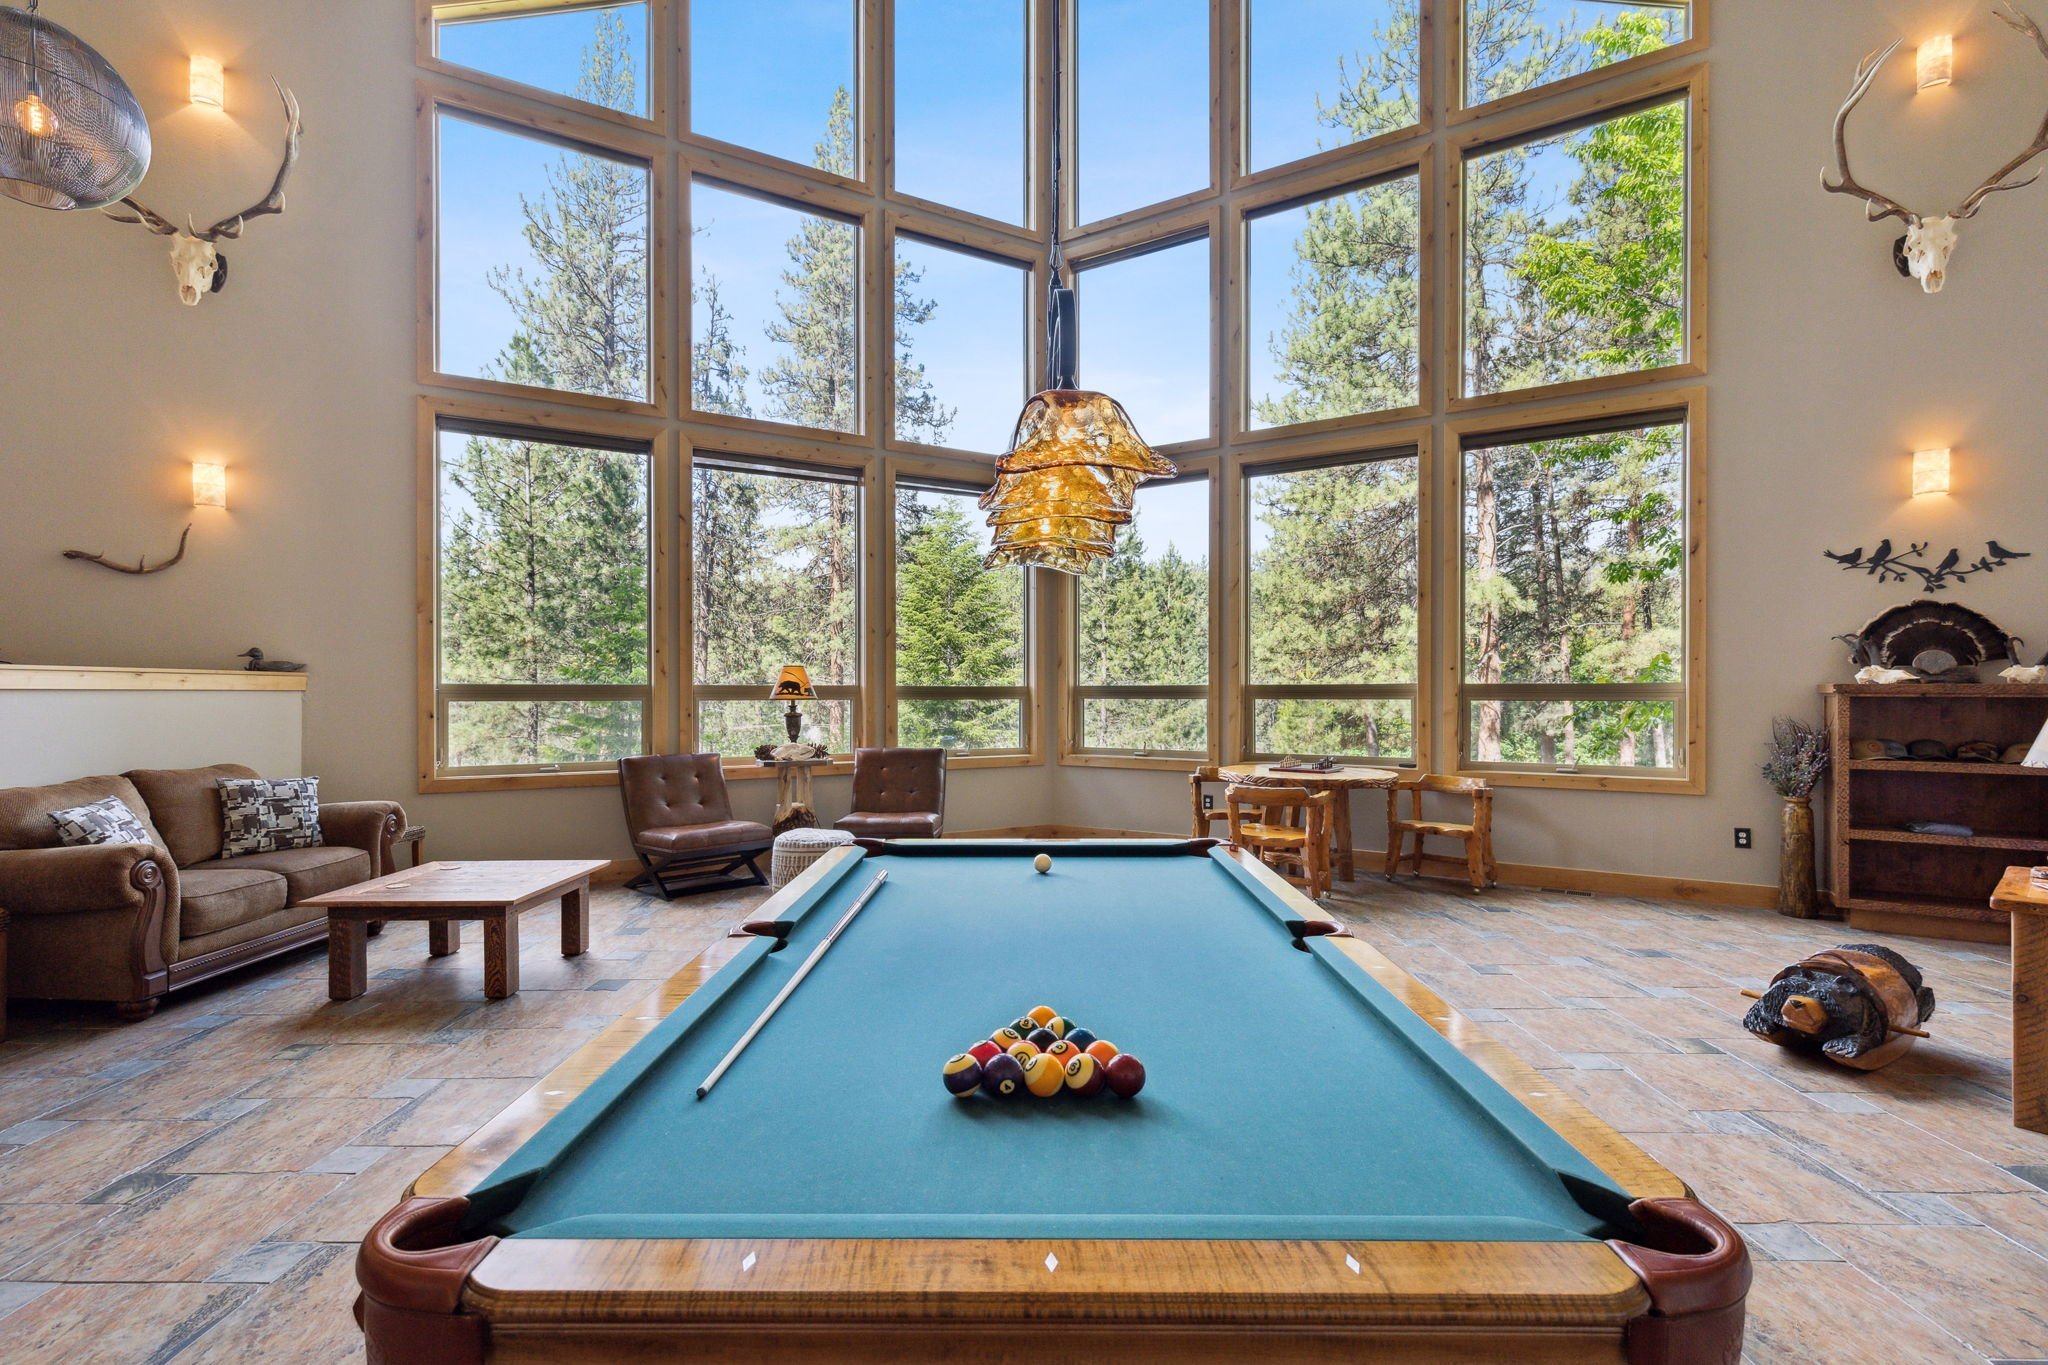 The Lodge at Forest Grove | Missoula Montana Fly Fishing Lodge | Lodges game room pool table and elk skulls.jpeg